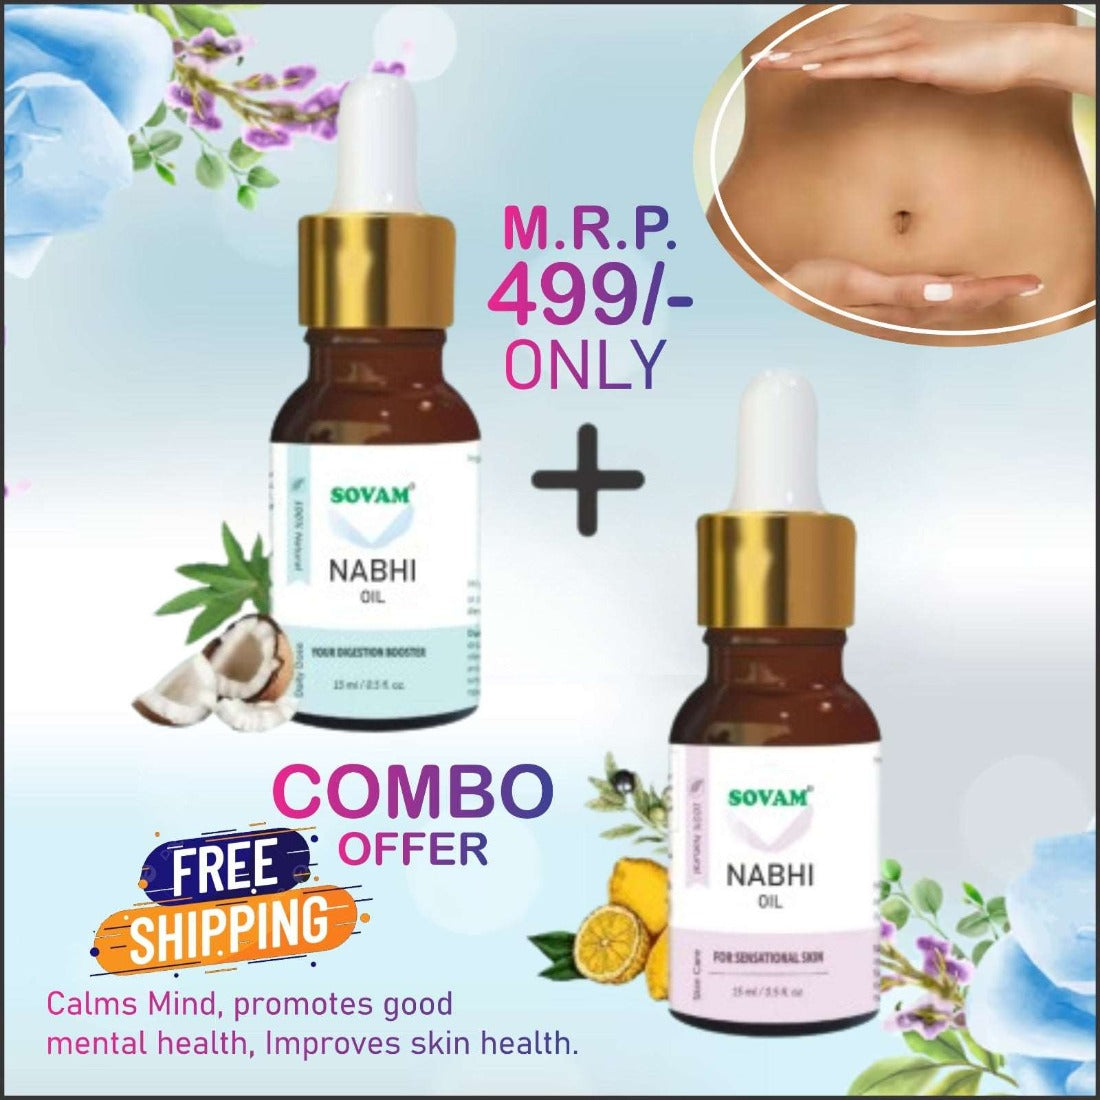 Nabhi Therapy Oil Combo Offer (Buy 1 Get 1 Free)